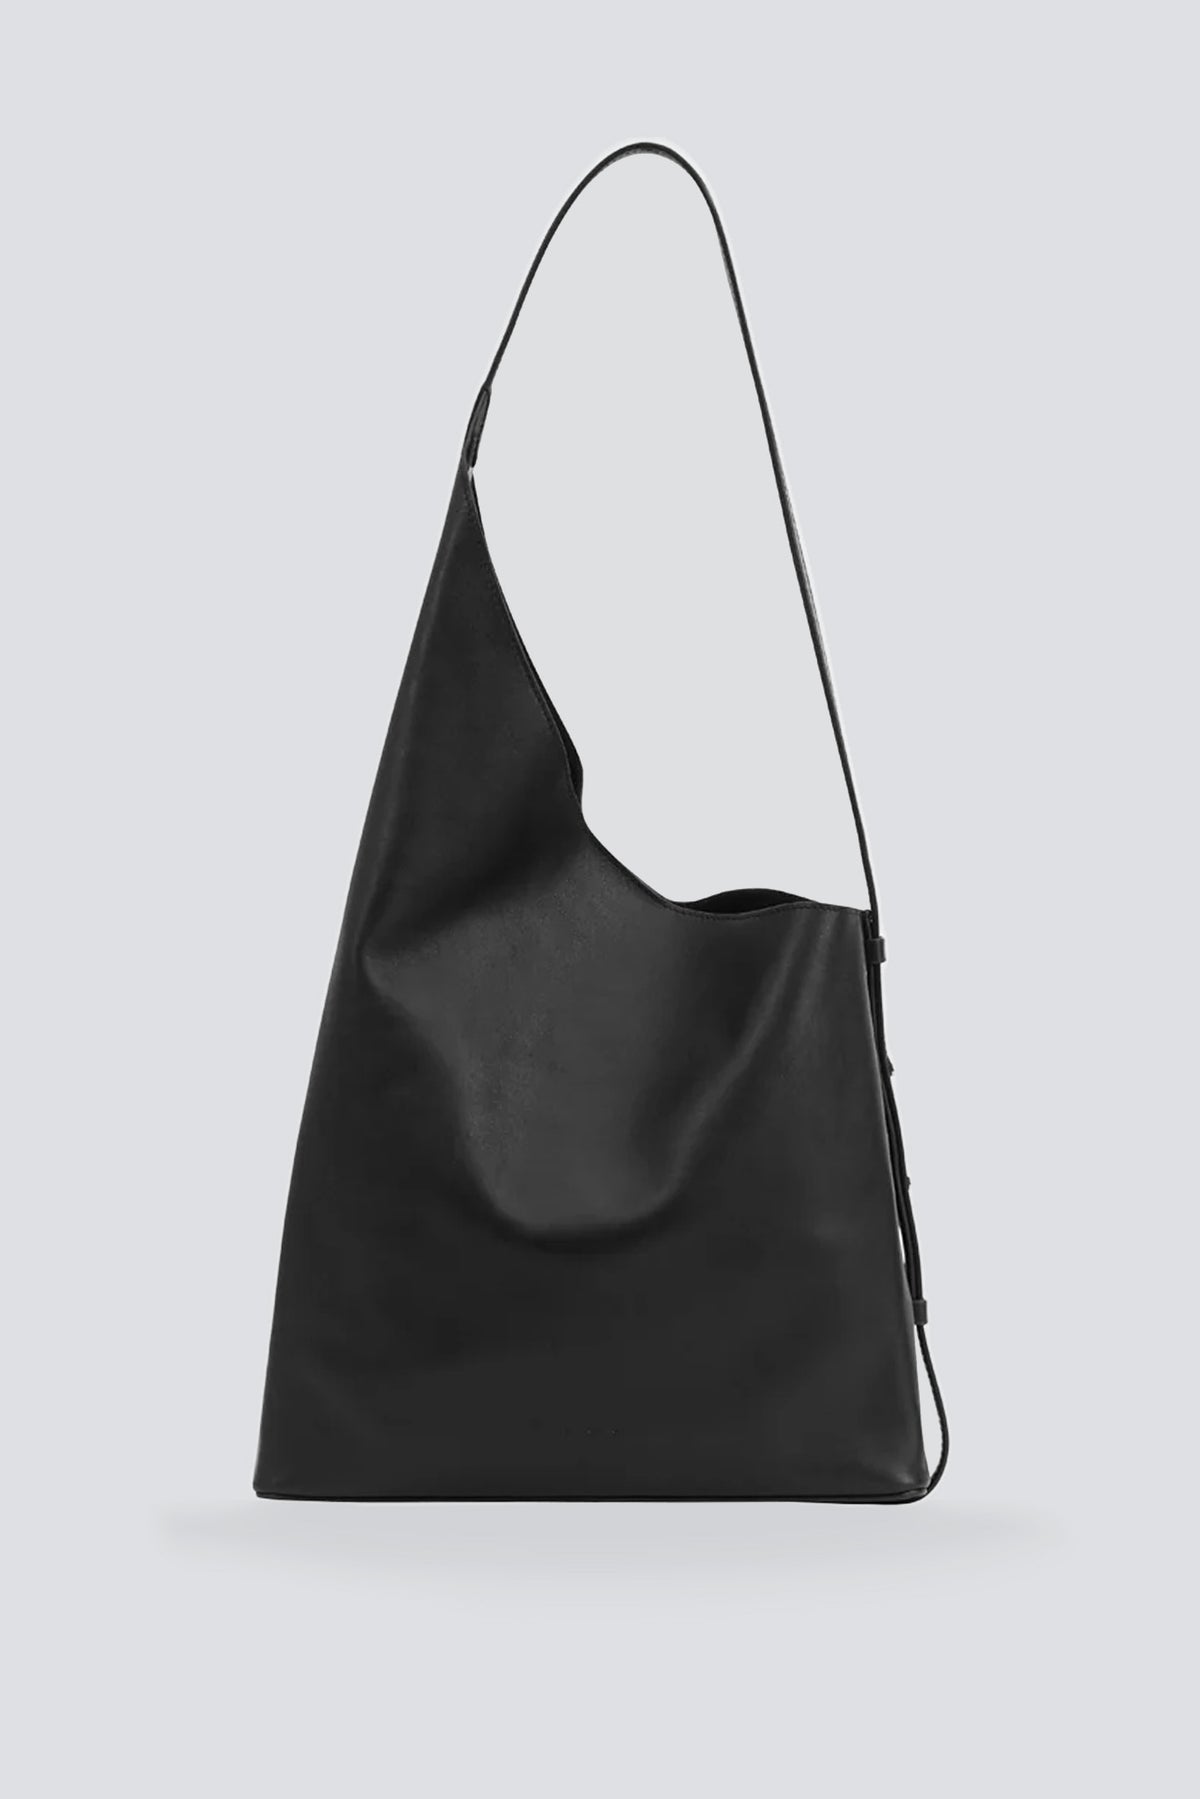 Aesther Ekme Demi Lune Smooth Leather Shoulder Bag In Dark